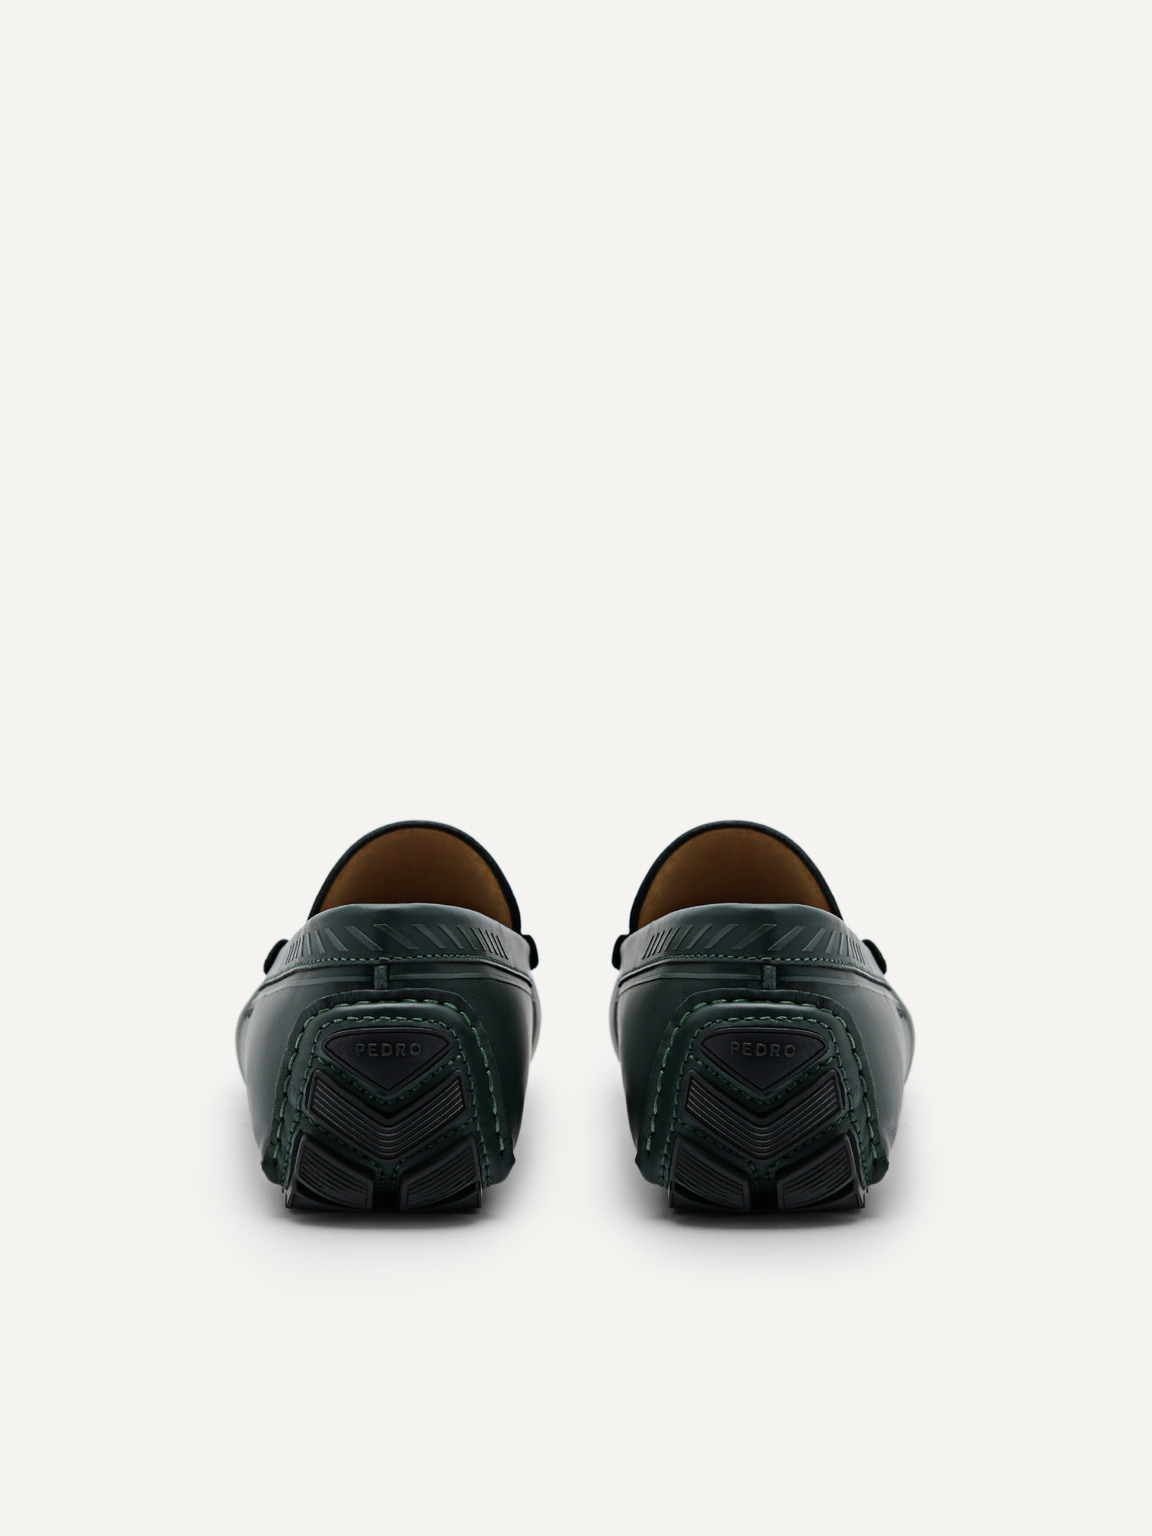 Leather Driving Shoes, Dark Green